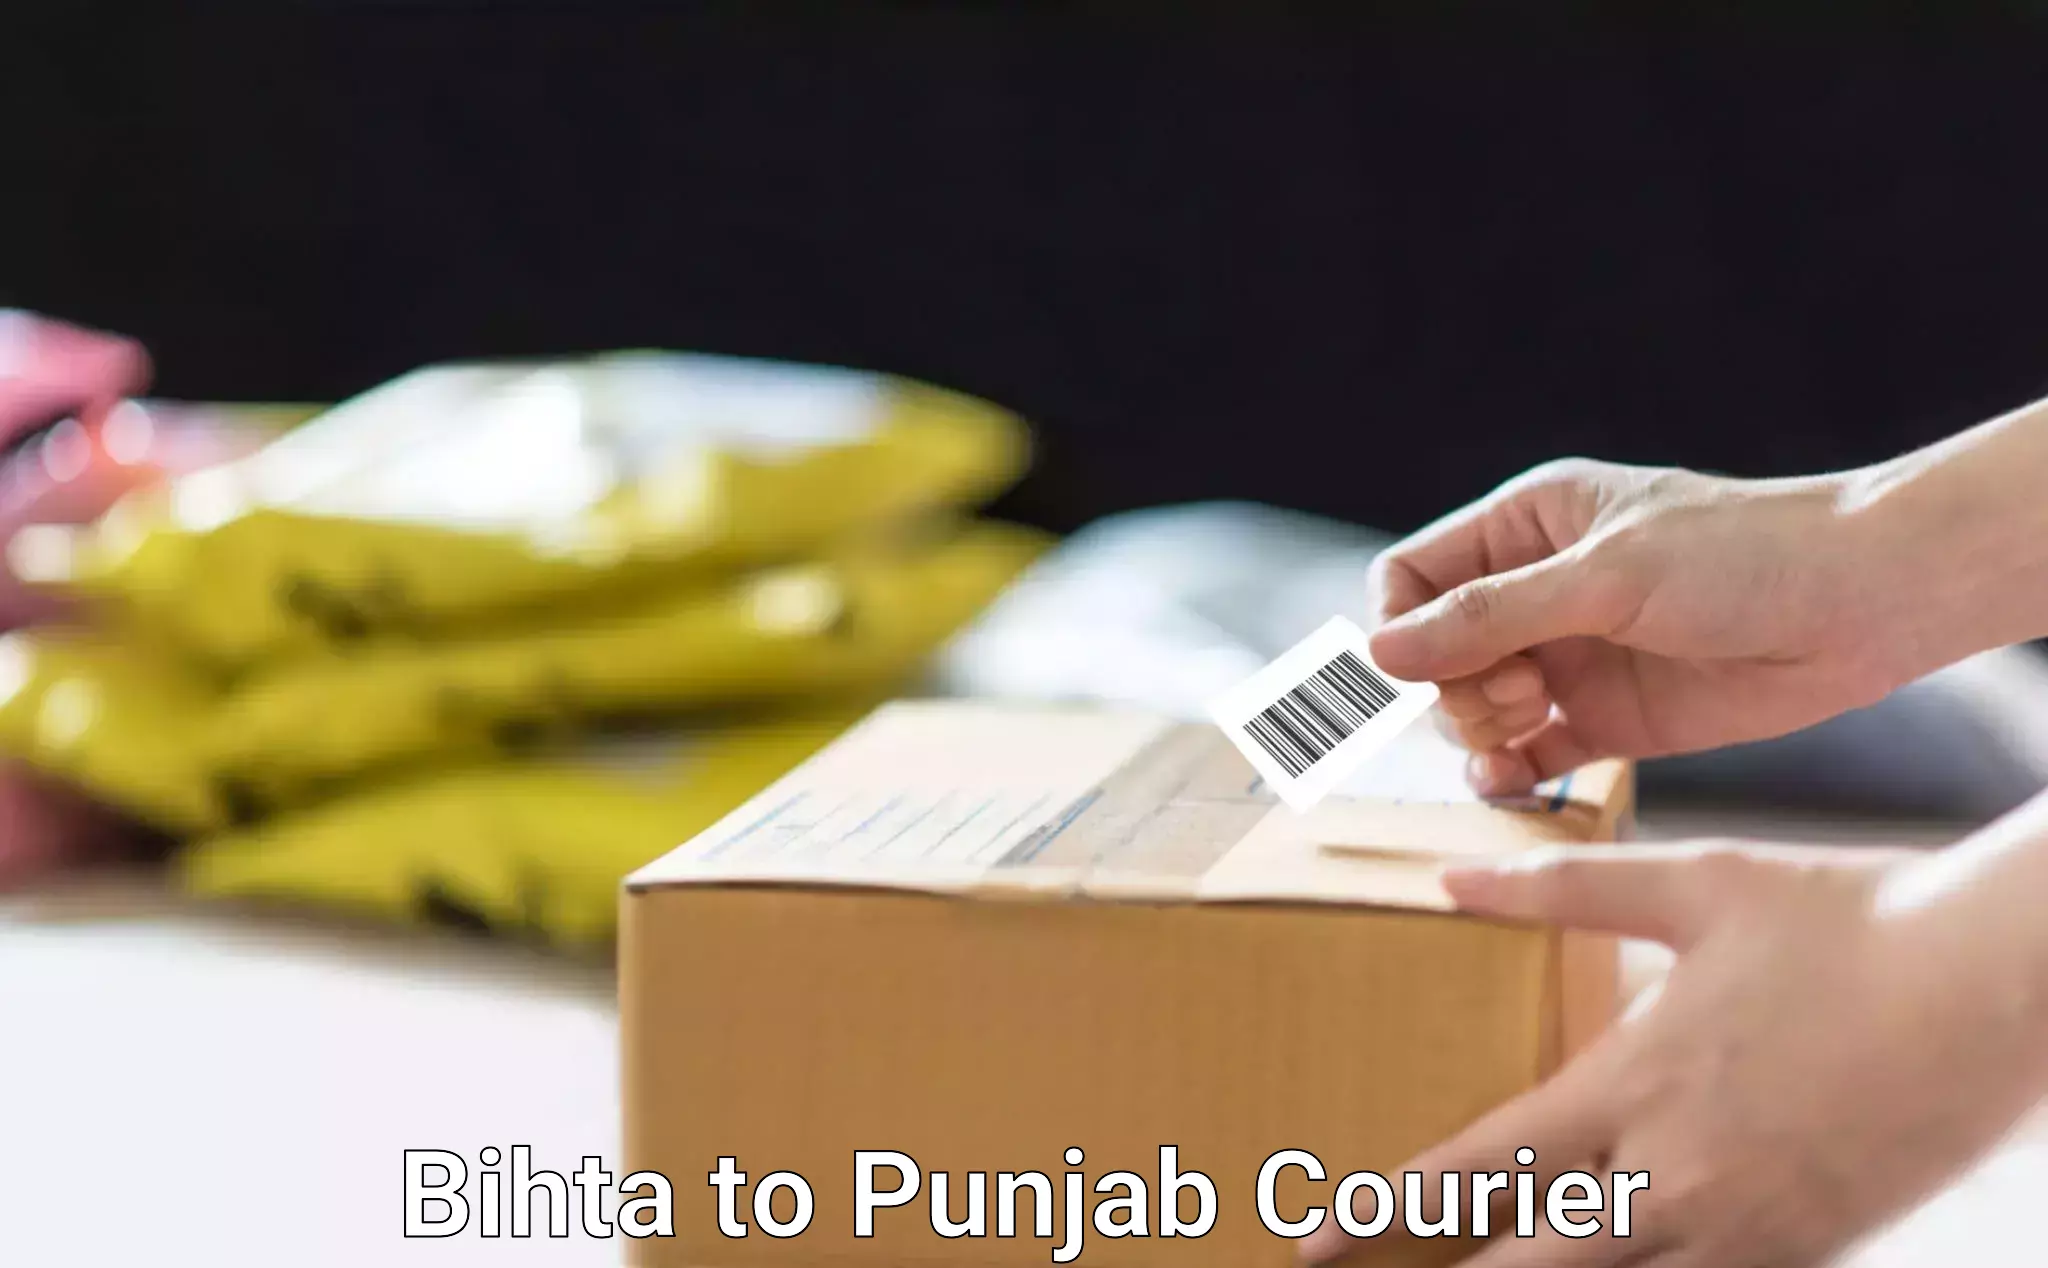 Professional movers and packers in Bihta to Anandpur Sahib